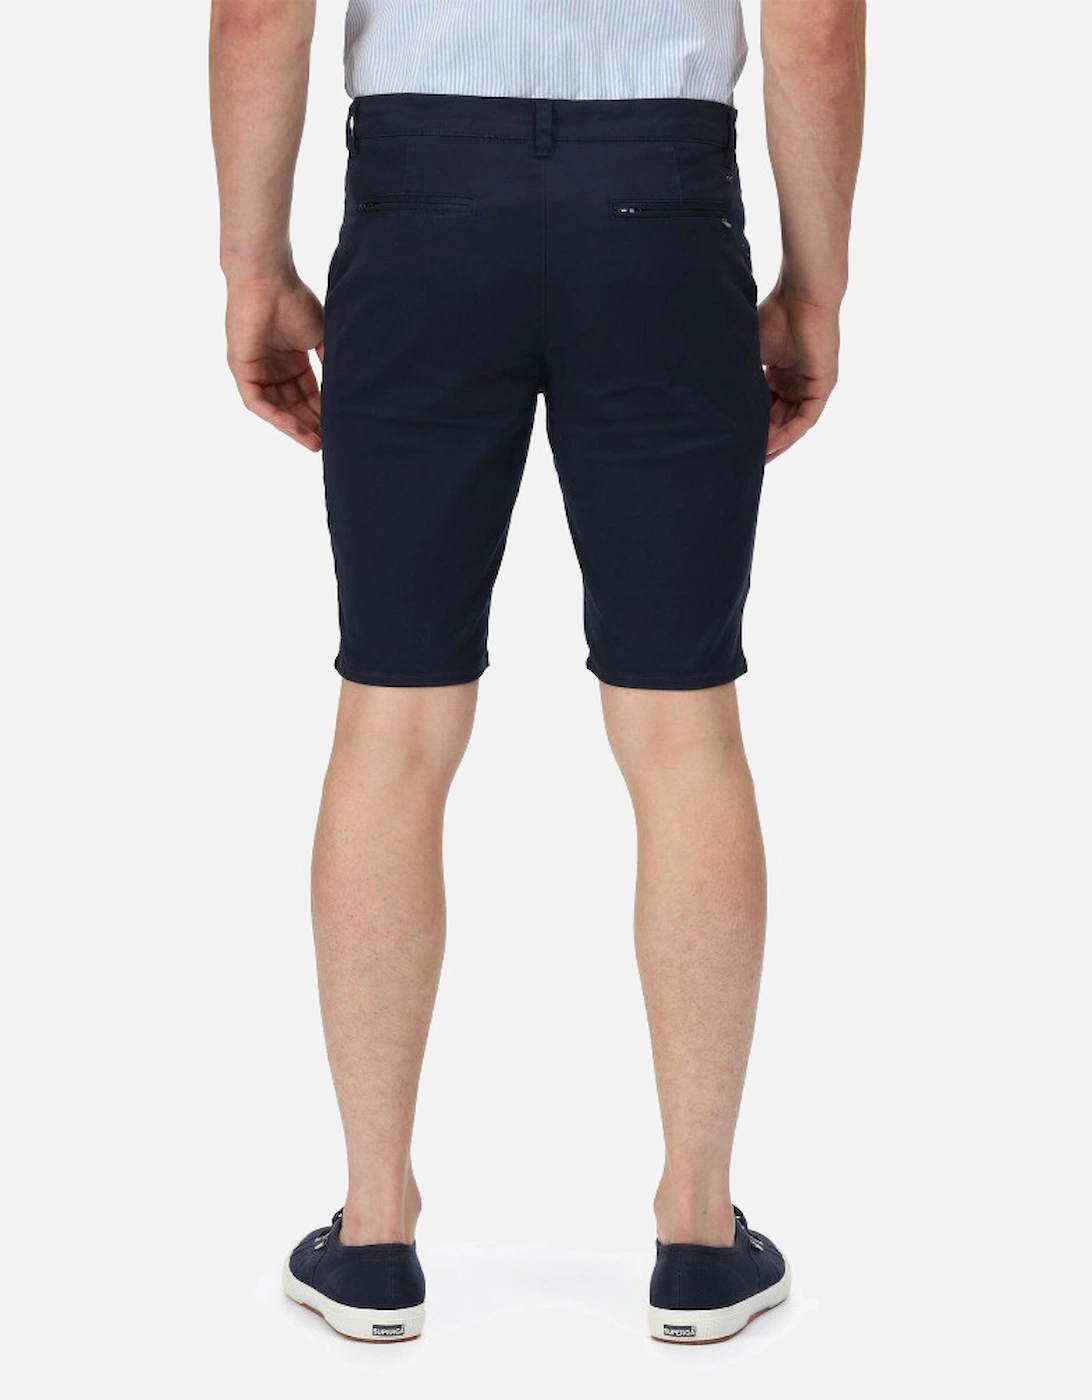 Mens Sandros Coolweave Cotton Reflective Shorts